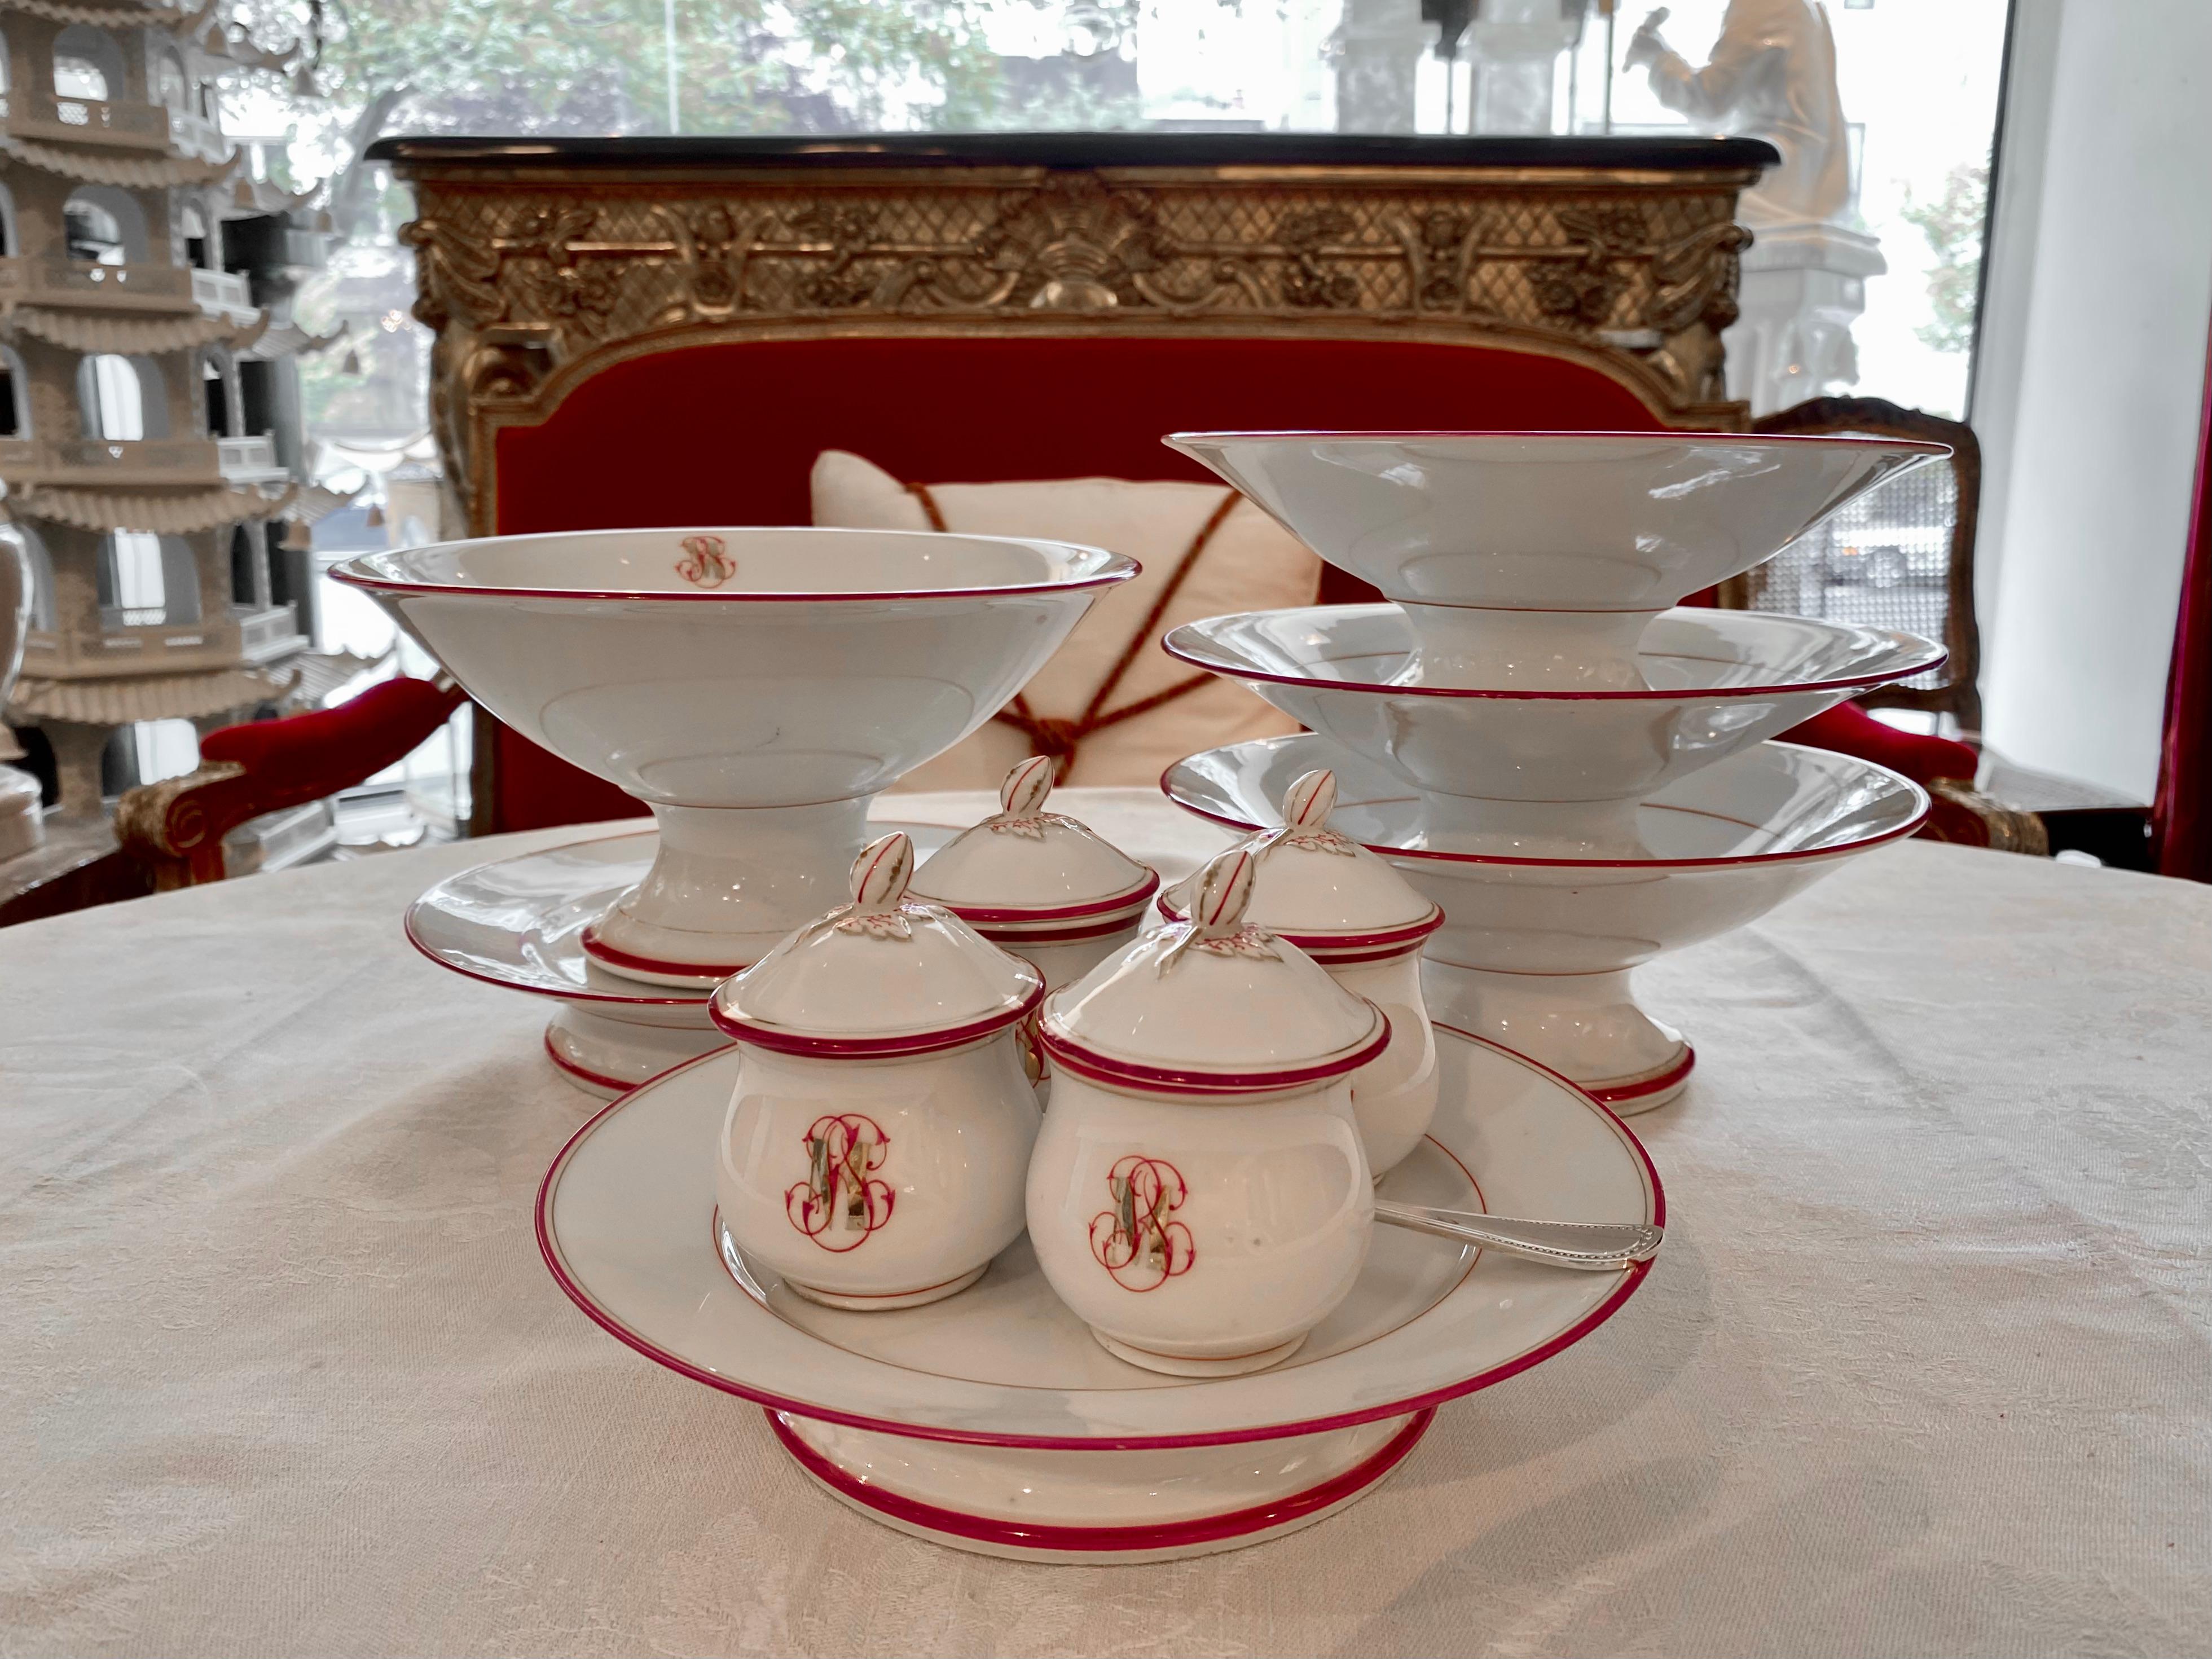 Magnificent French Antique Porcelain 116-Piece Dinner Set, 19th Century In Good Condition For Sale In Montreal, Quebec